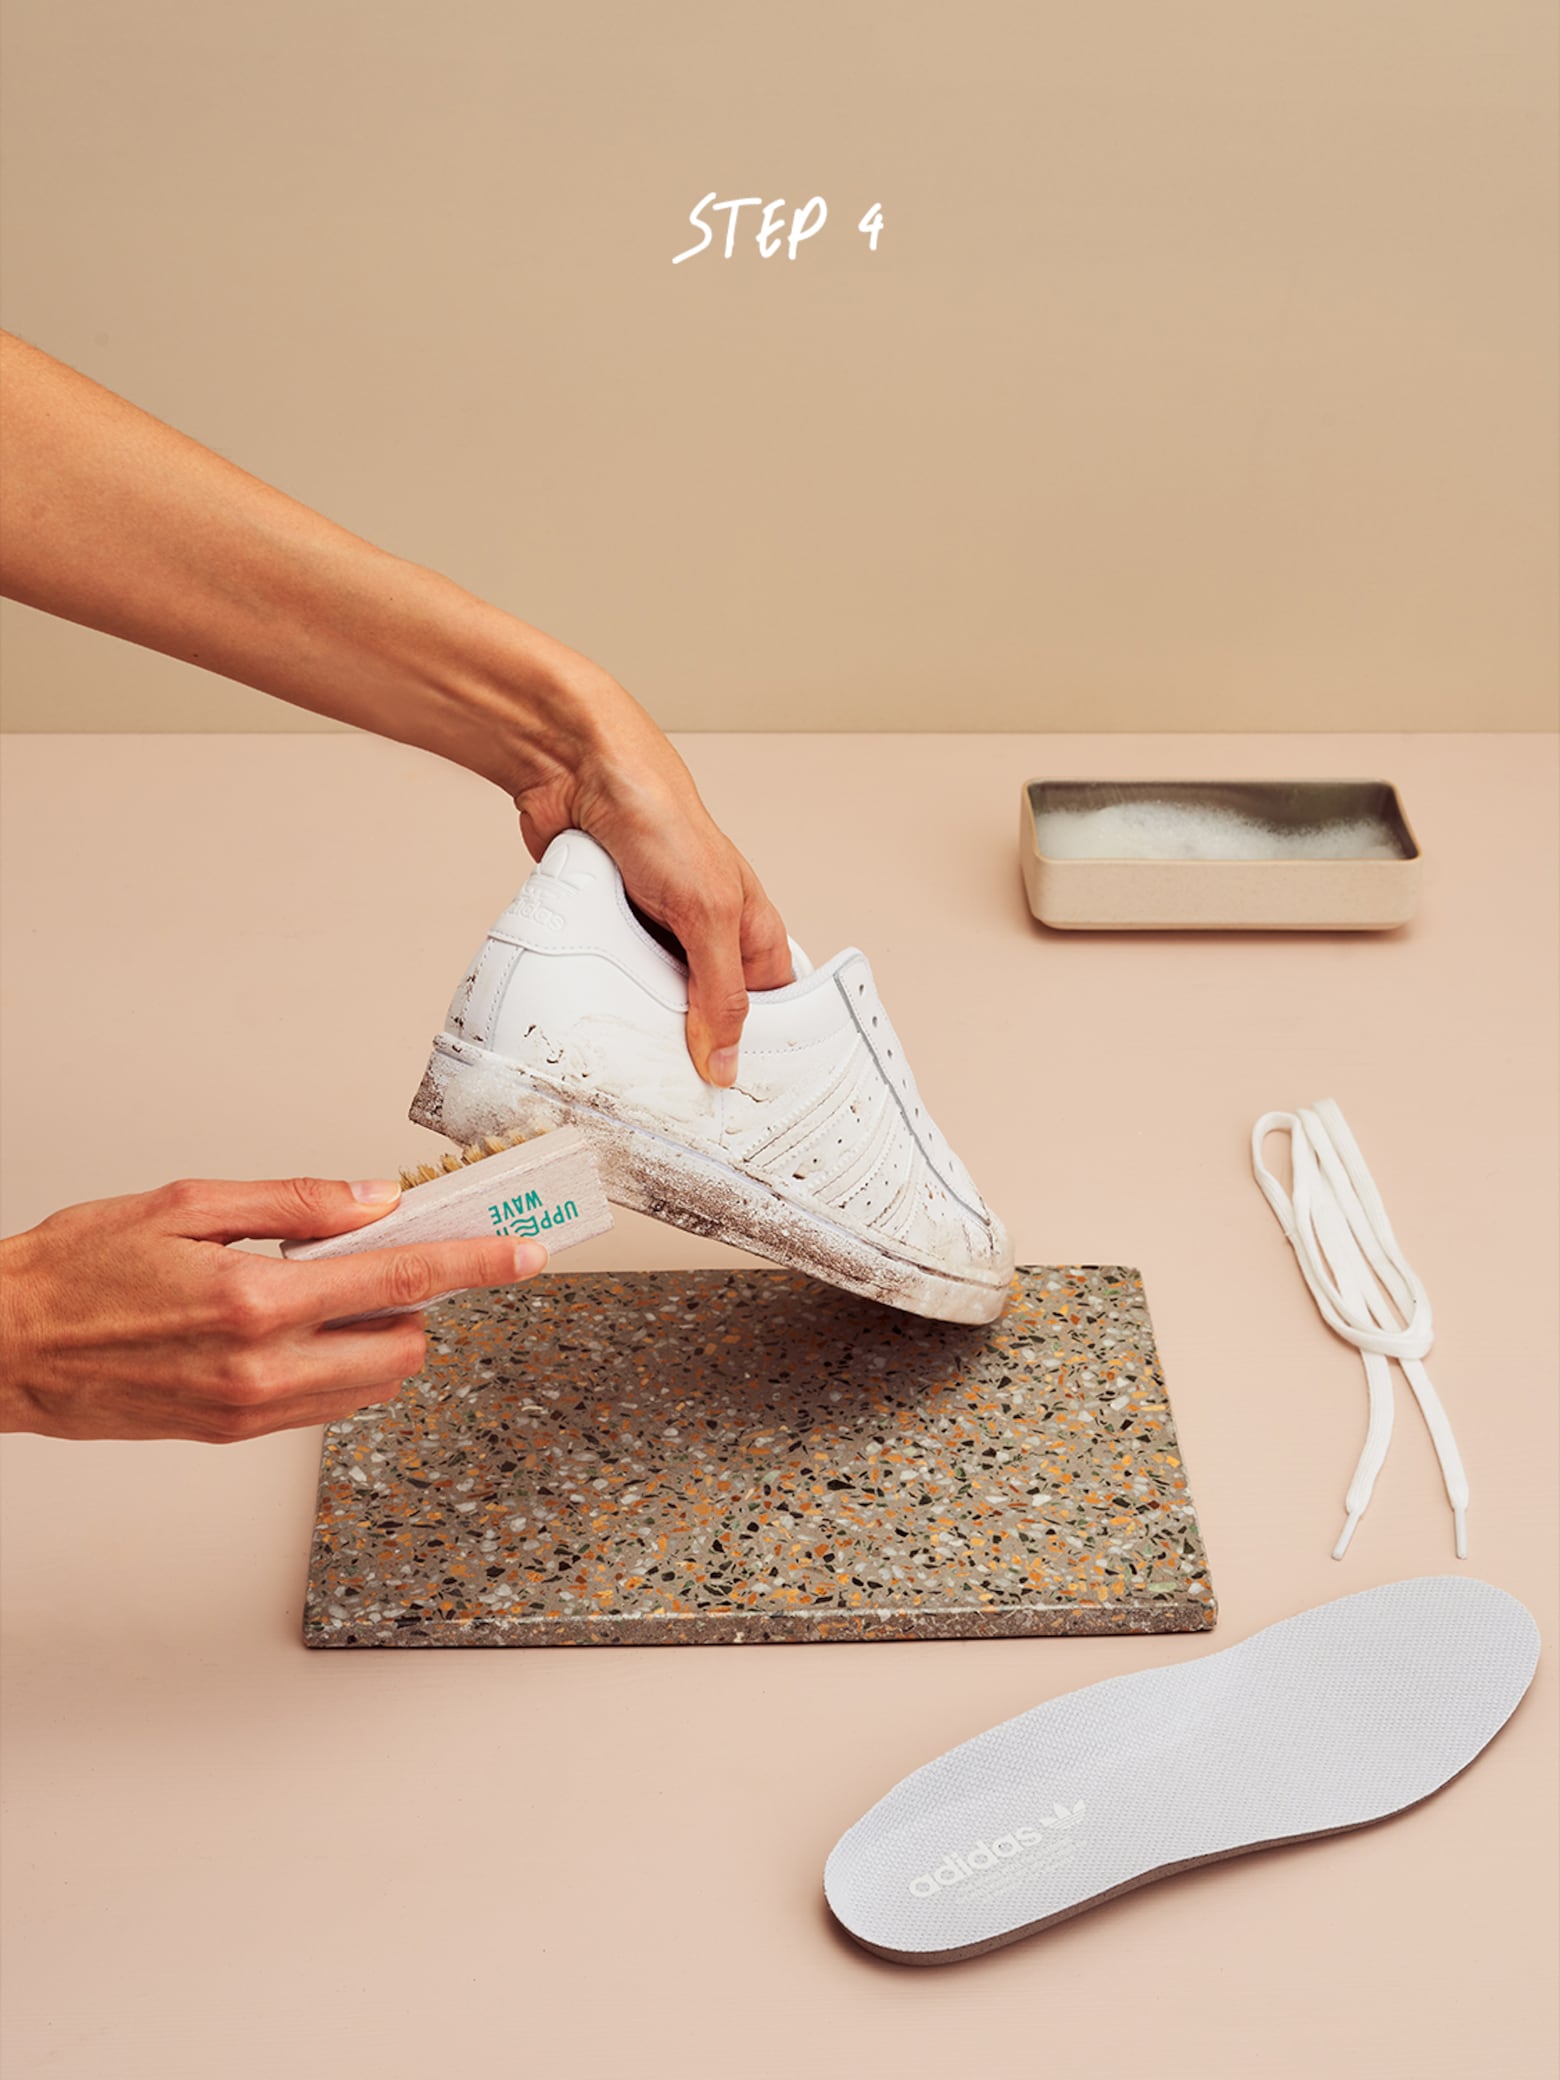 Everything you need to know How to clean your sneakers